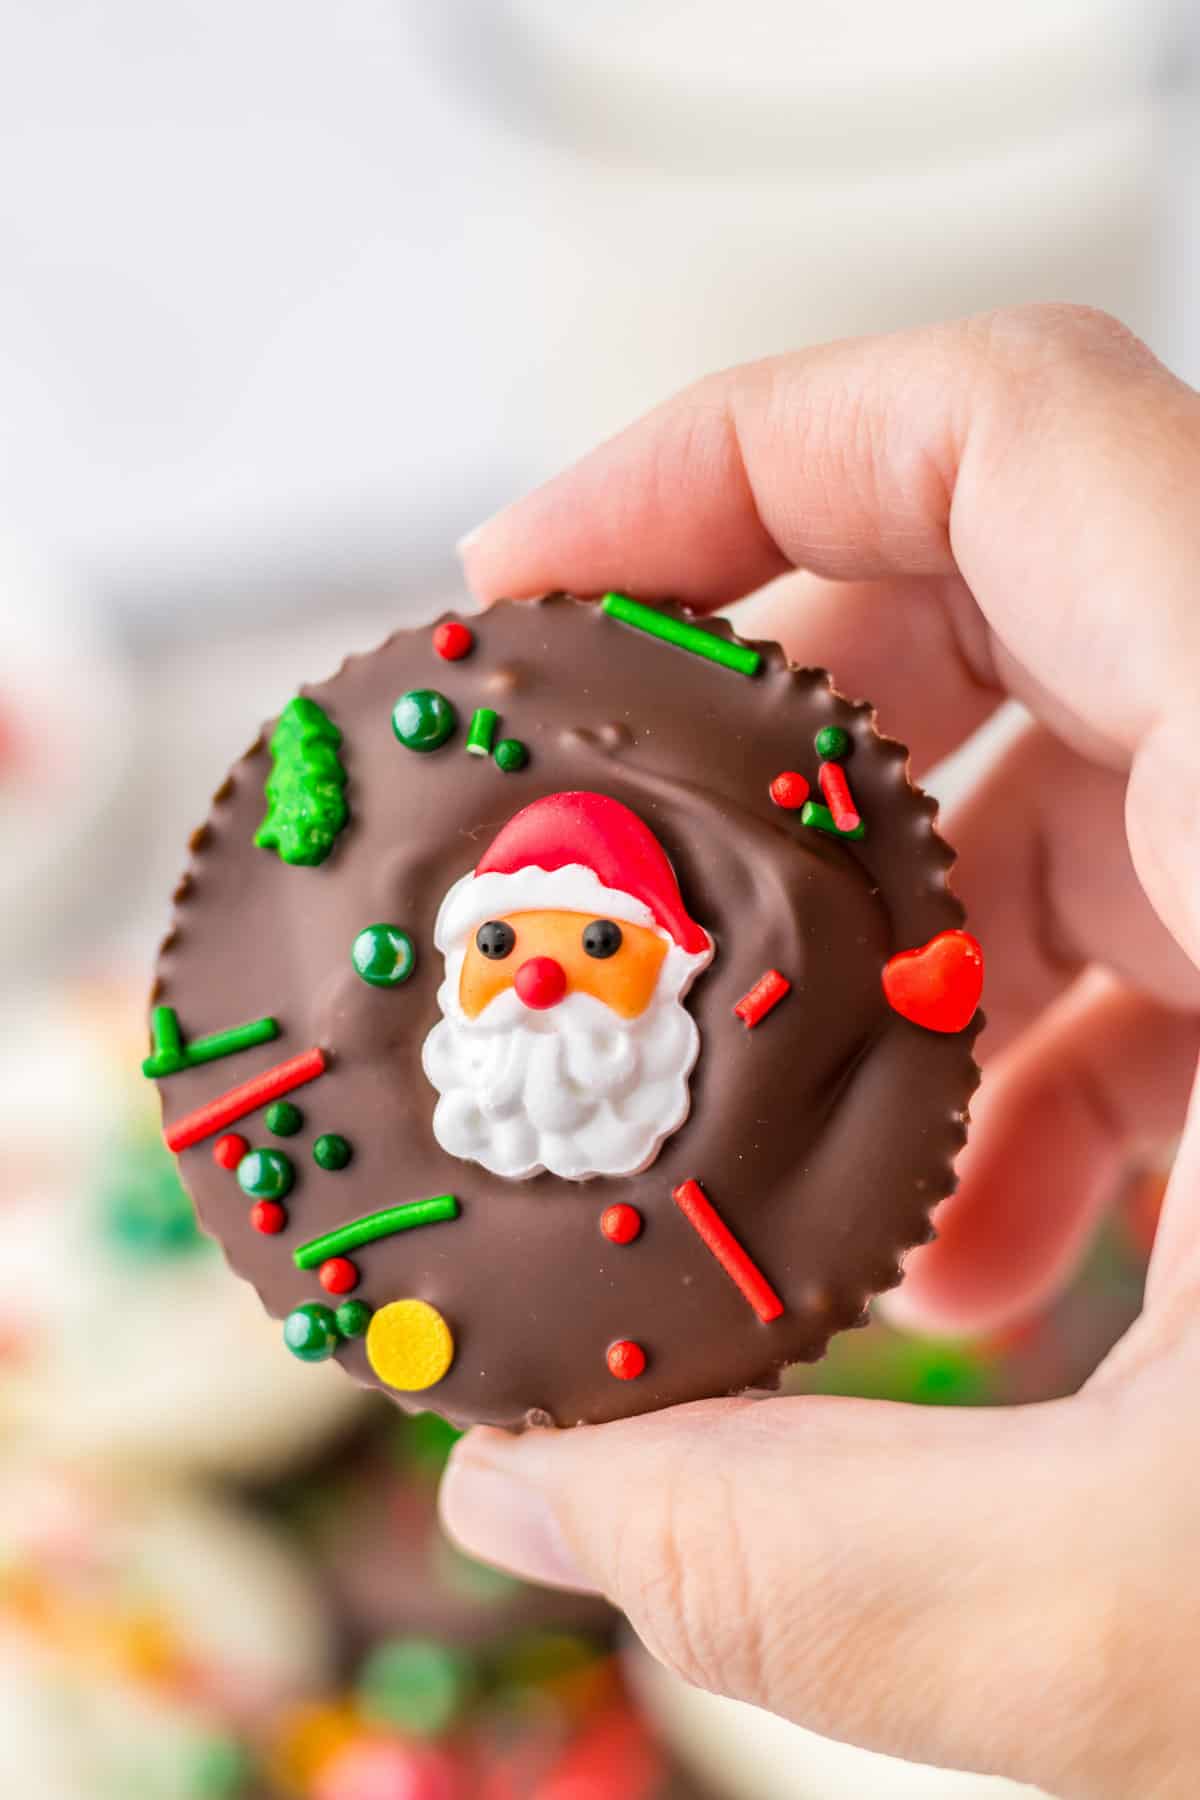 Hand holding homemade Reese's peanut butter cup with christmas sprinkles.